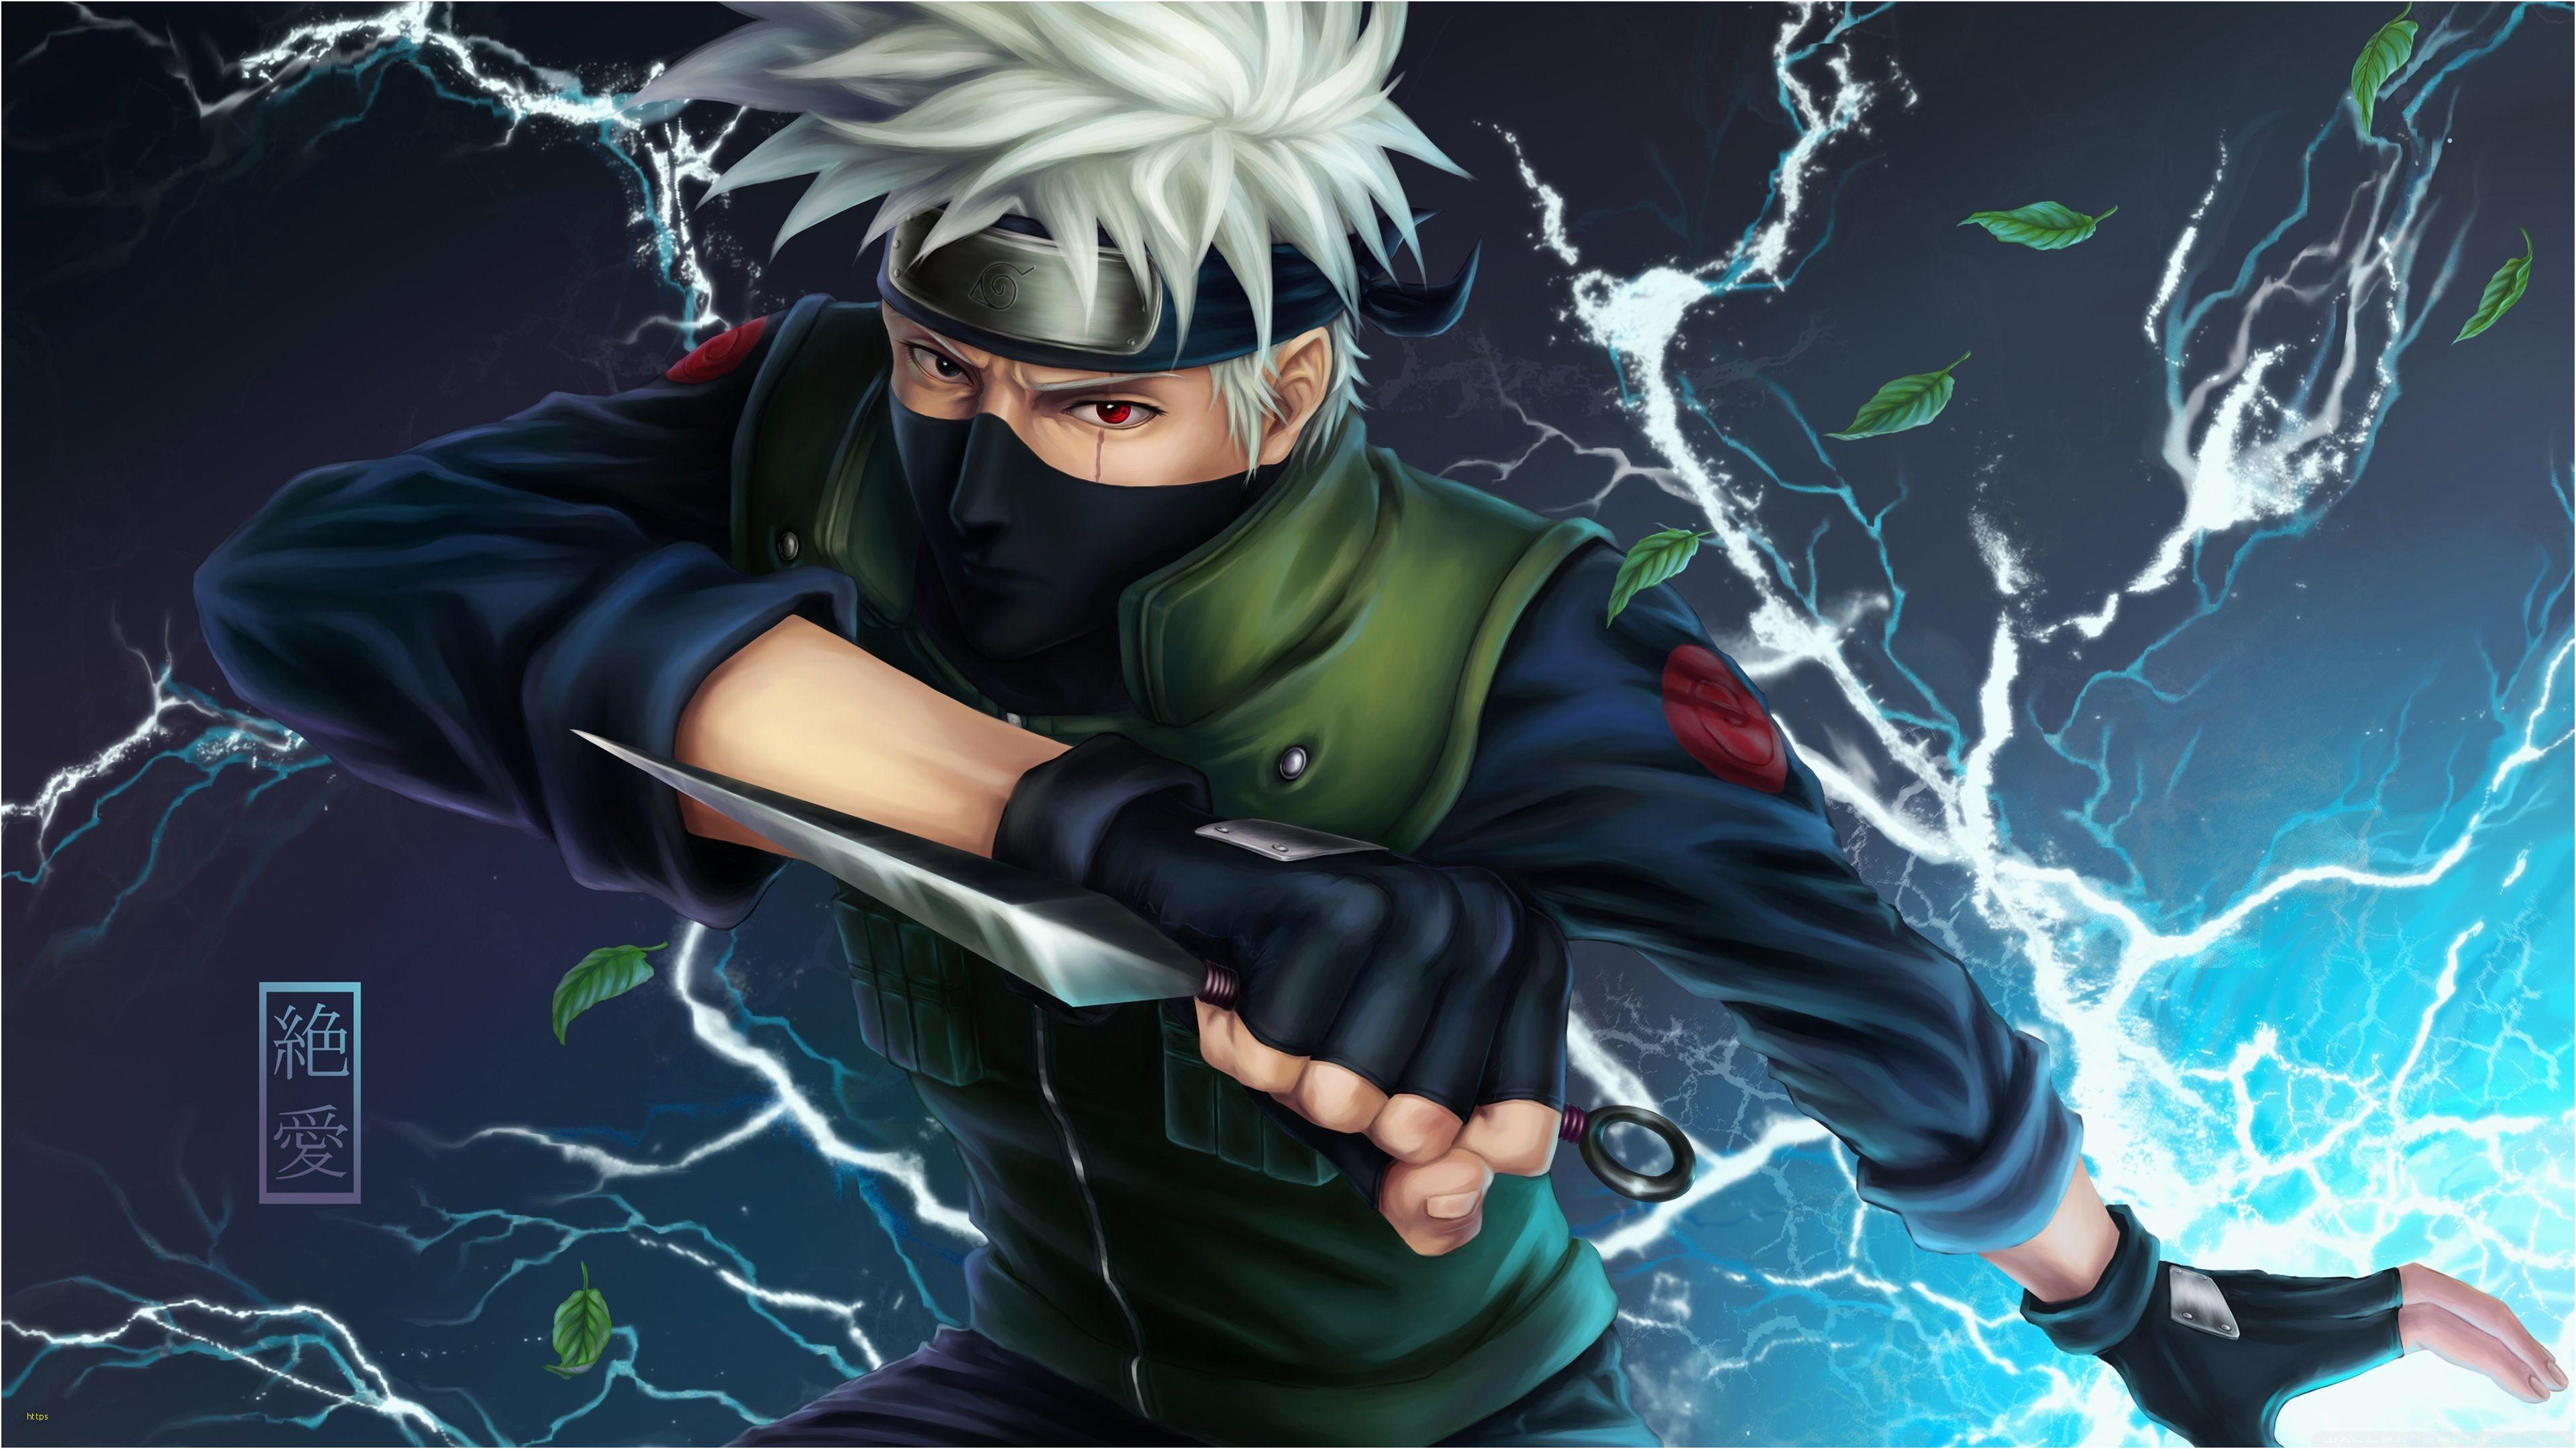 Wallpaper Hd Naruto Android App Free Download In Apk